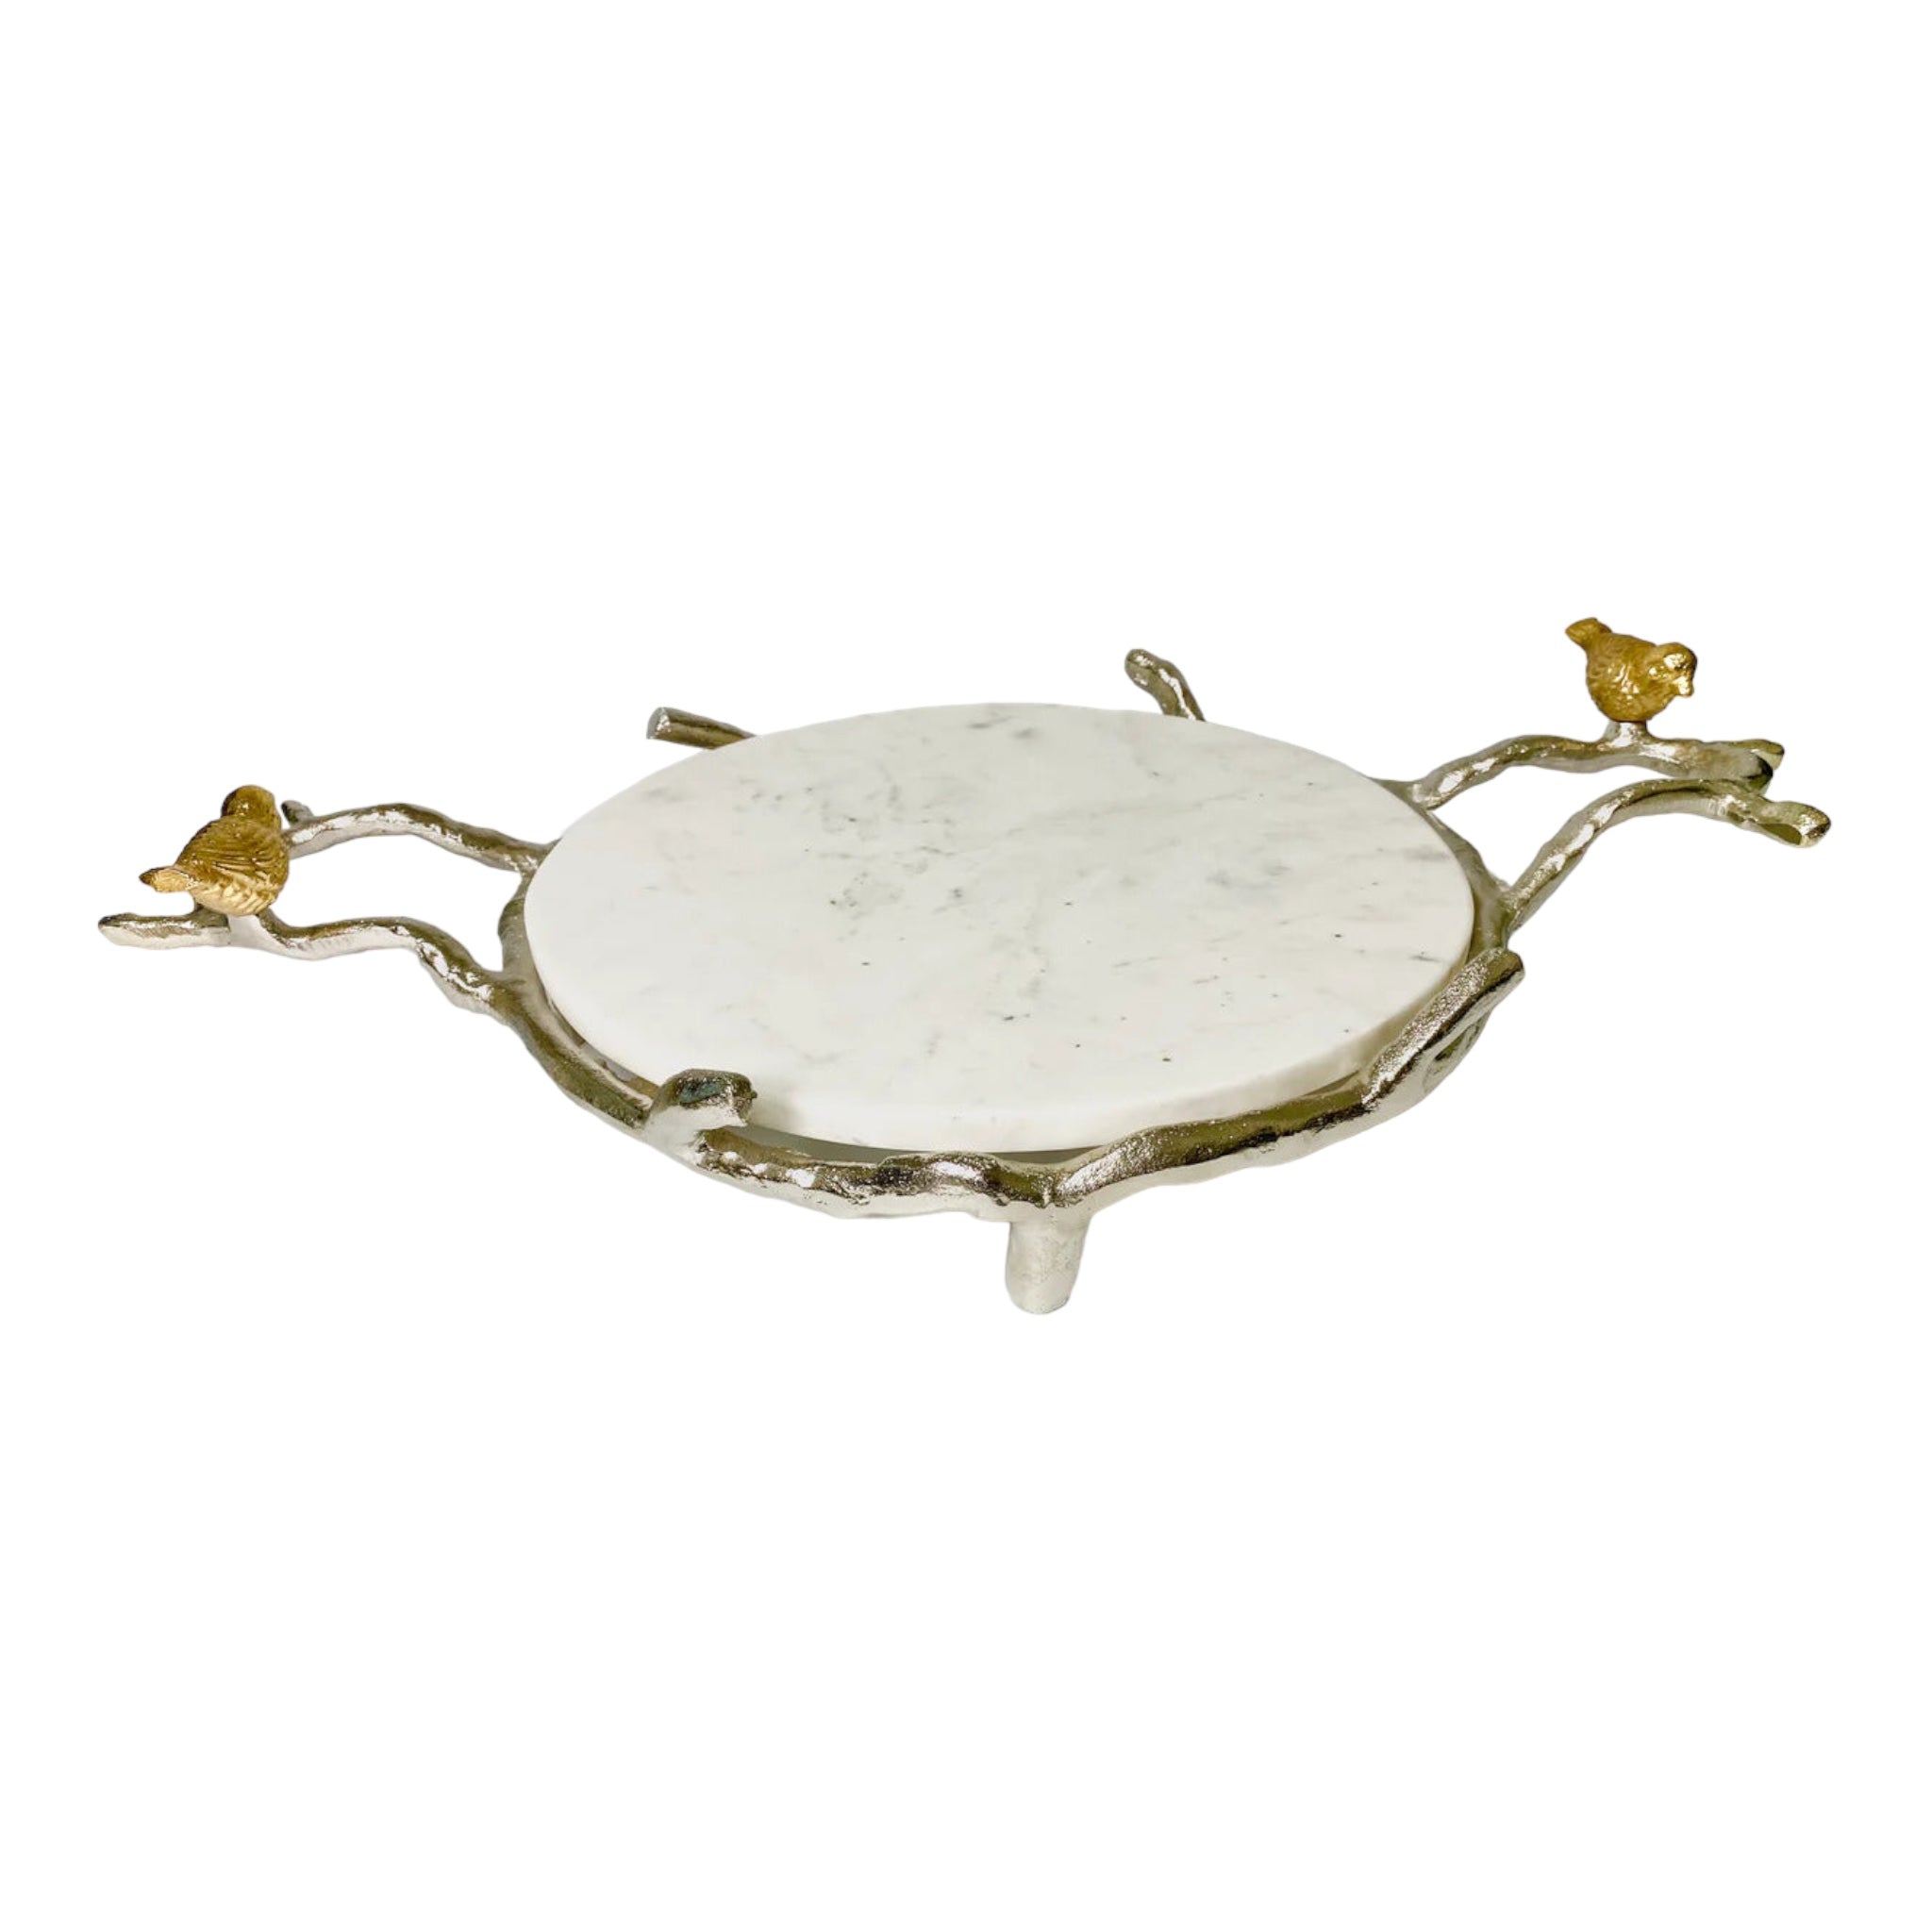 Atelier Marble decorative tray with golden birds, round.